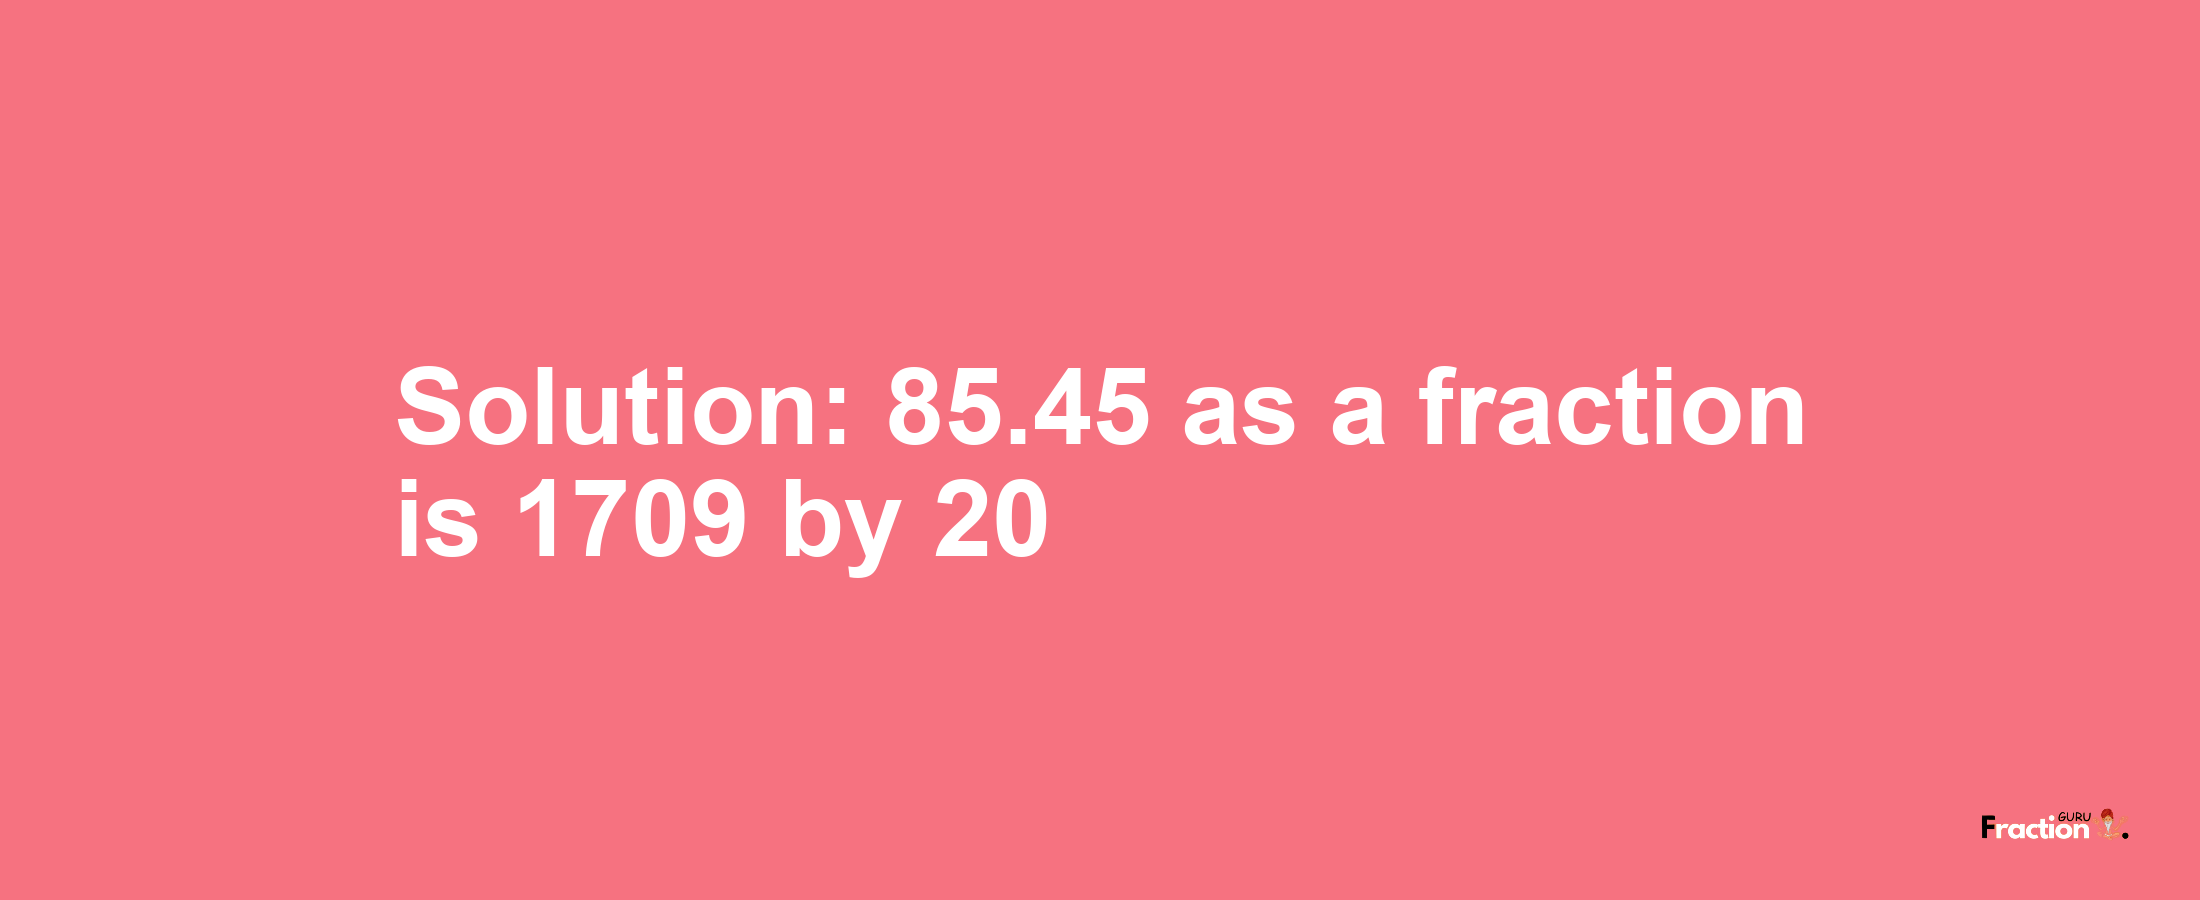 Solution:85.45 as a fraction is 1709/20